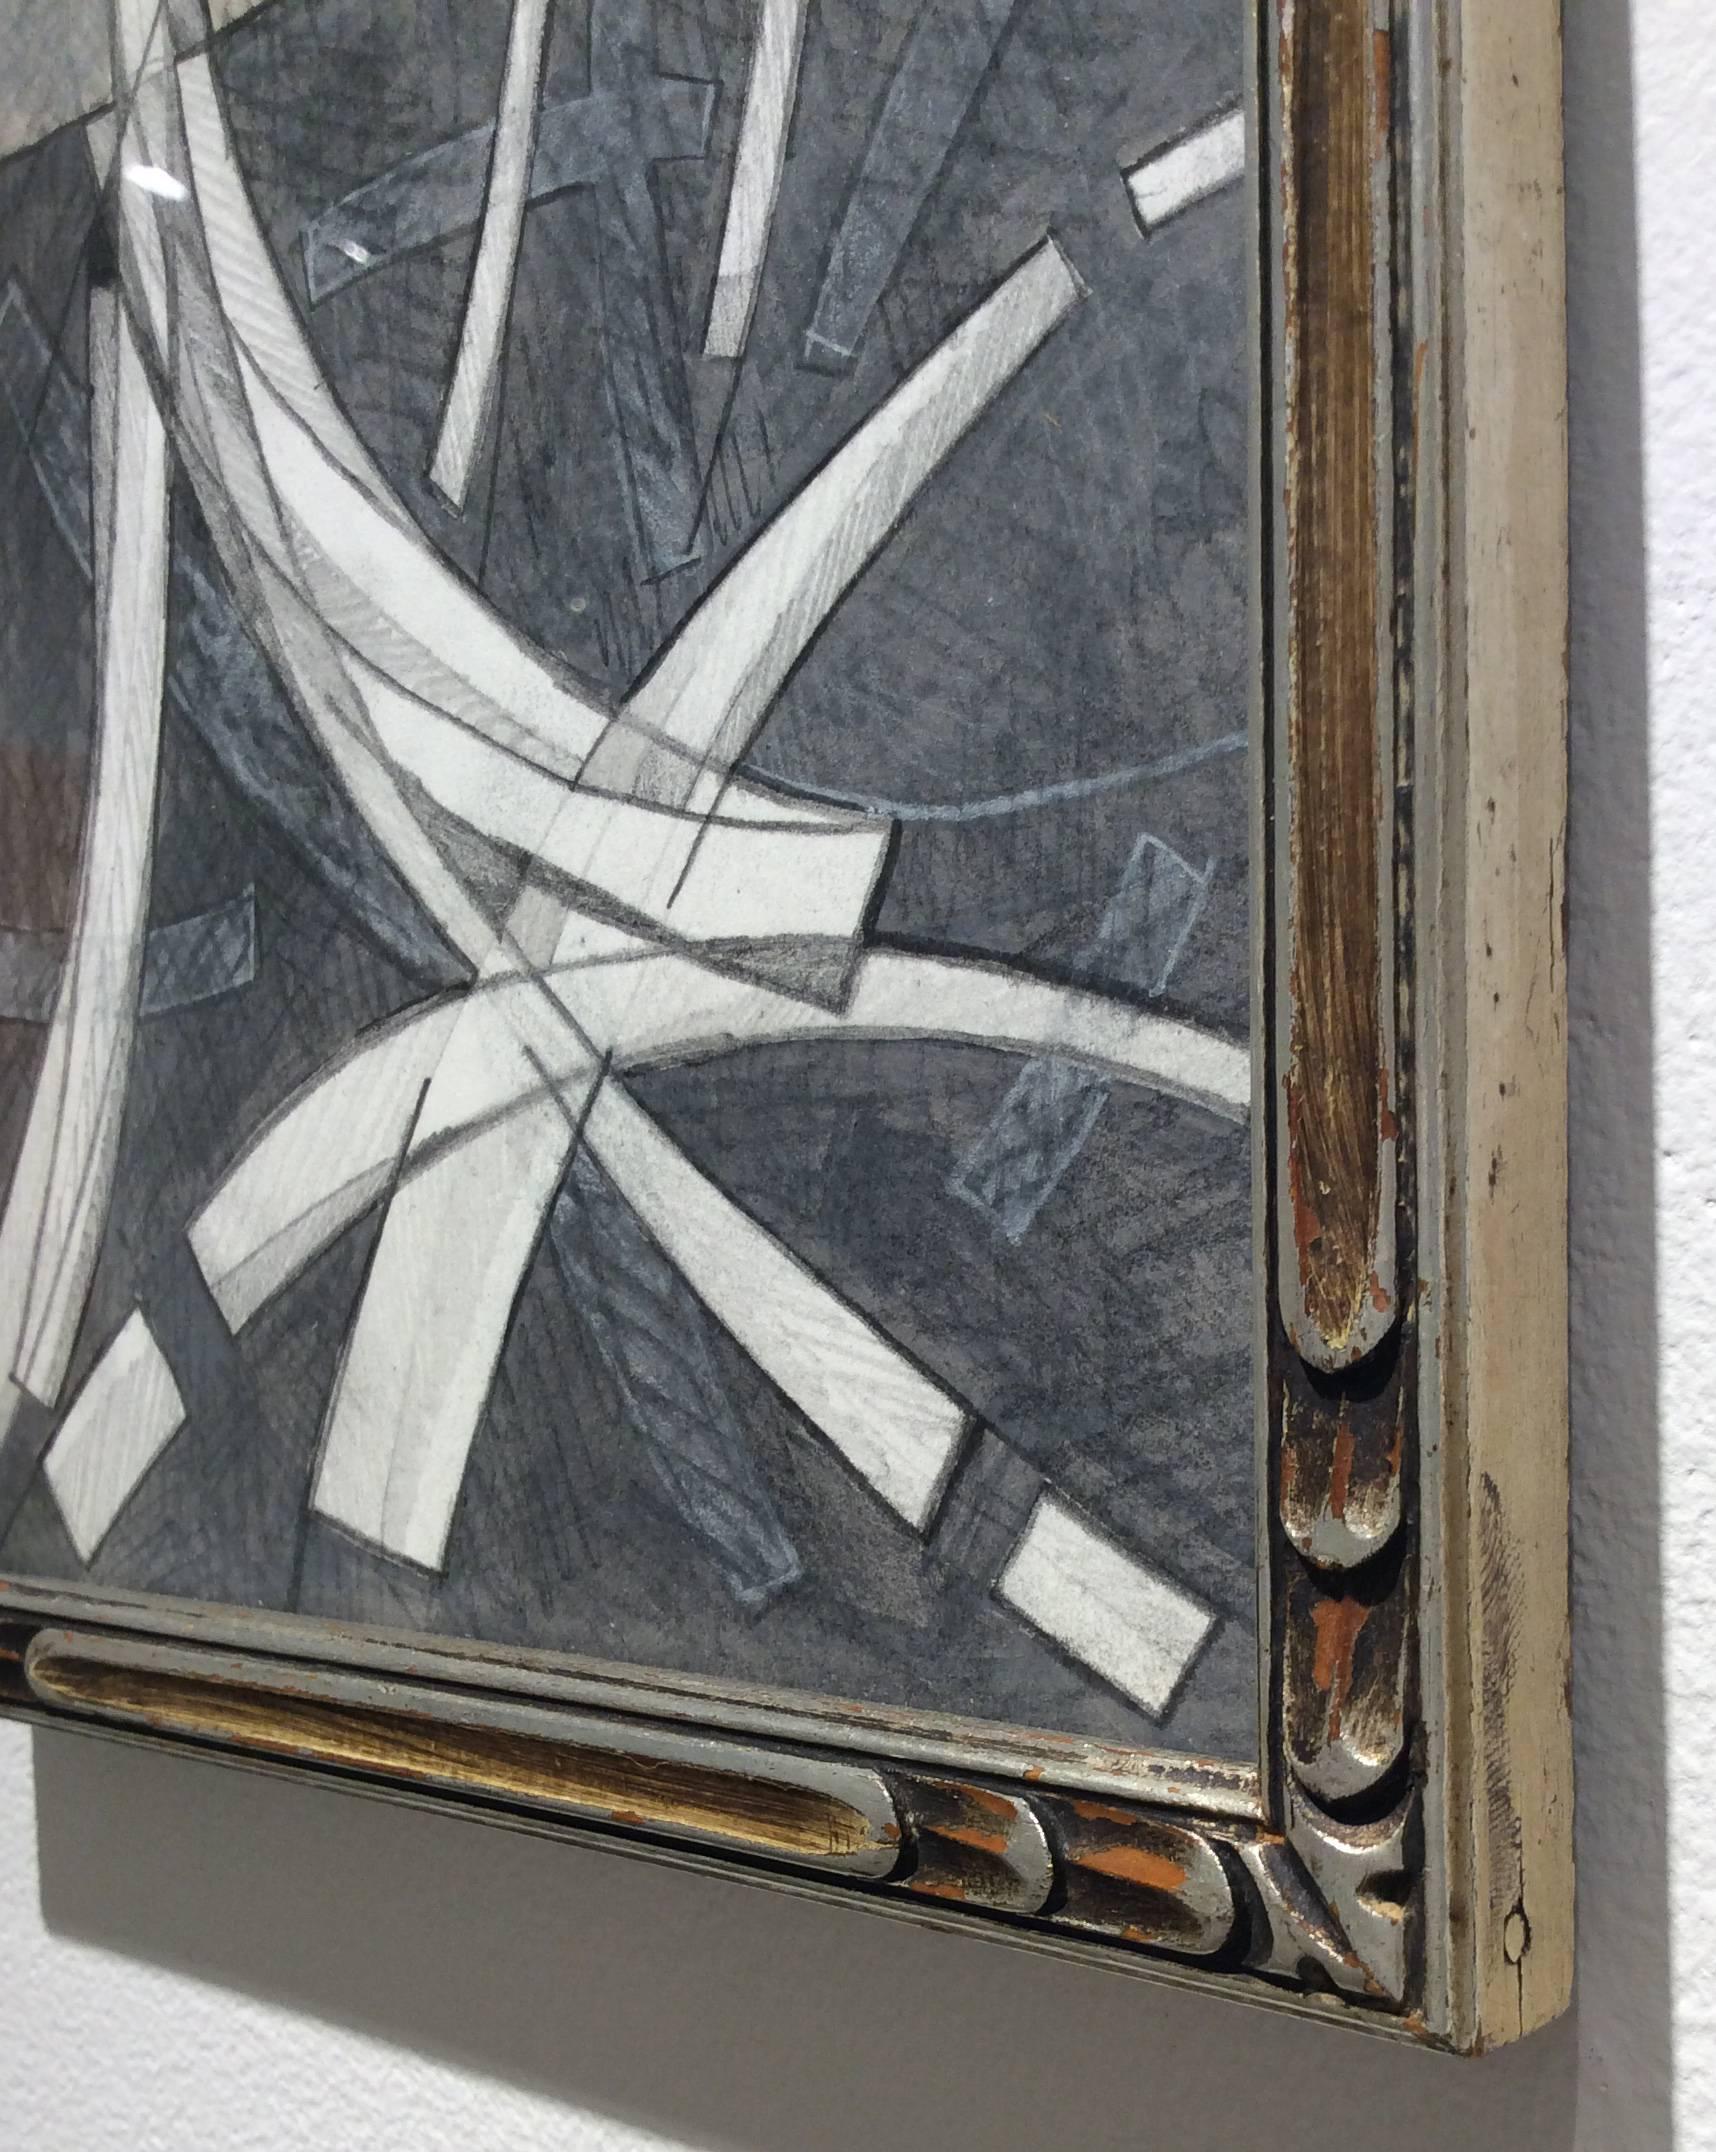 Arabesque 1 (Graphite Work on Paper in Vintage Frame) - Gray Abstract Drawing by David Dew Bruner